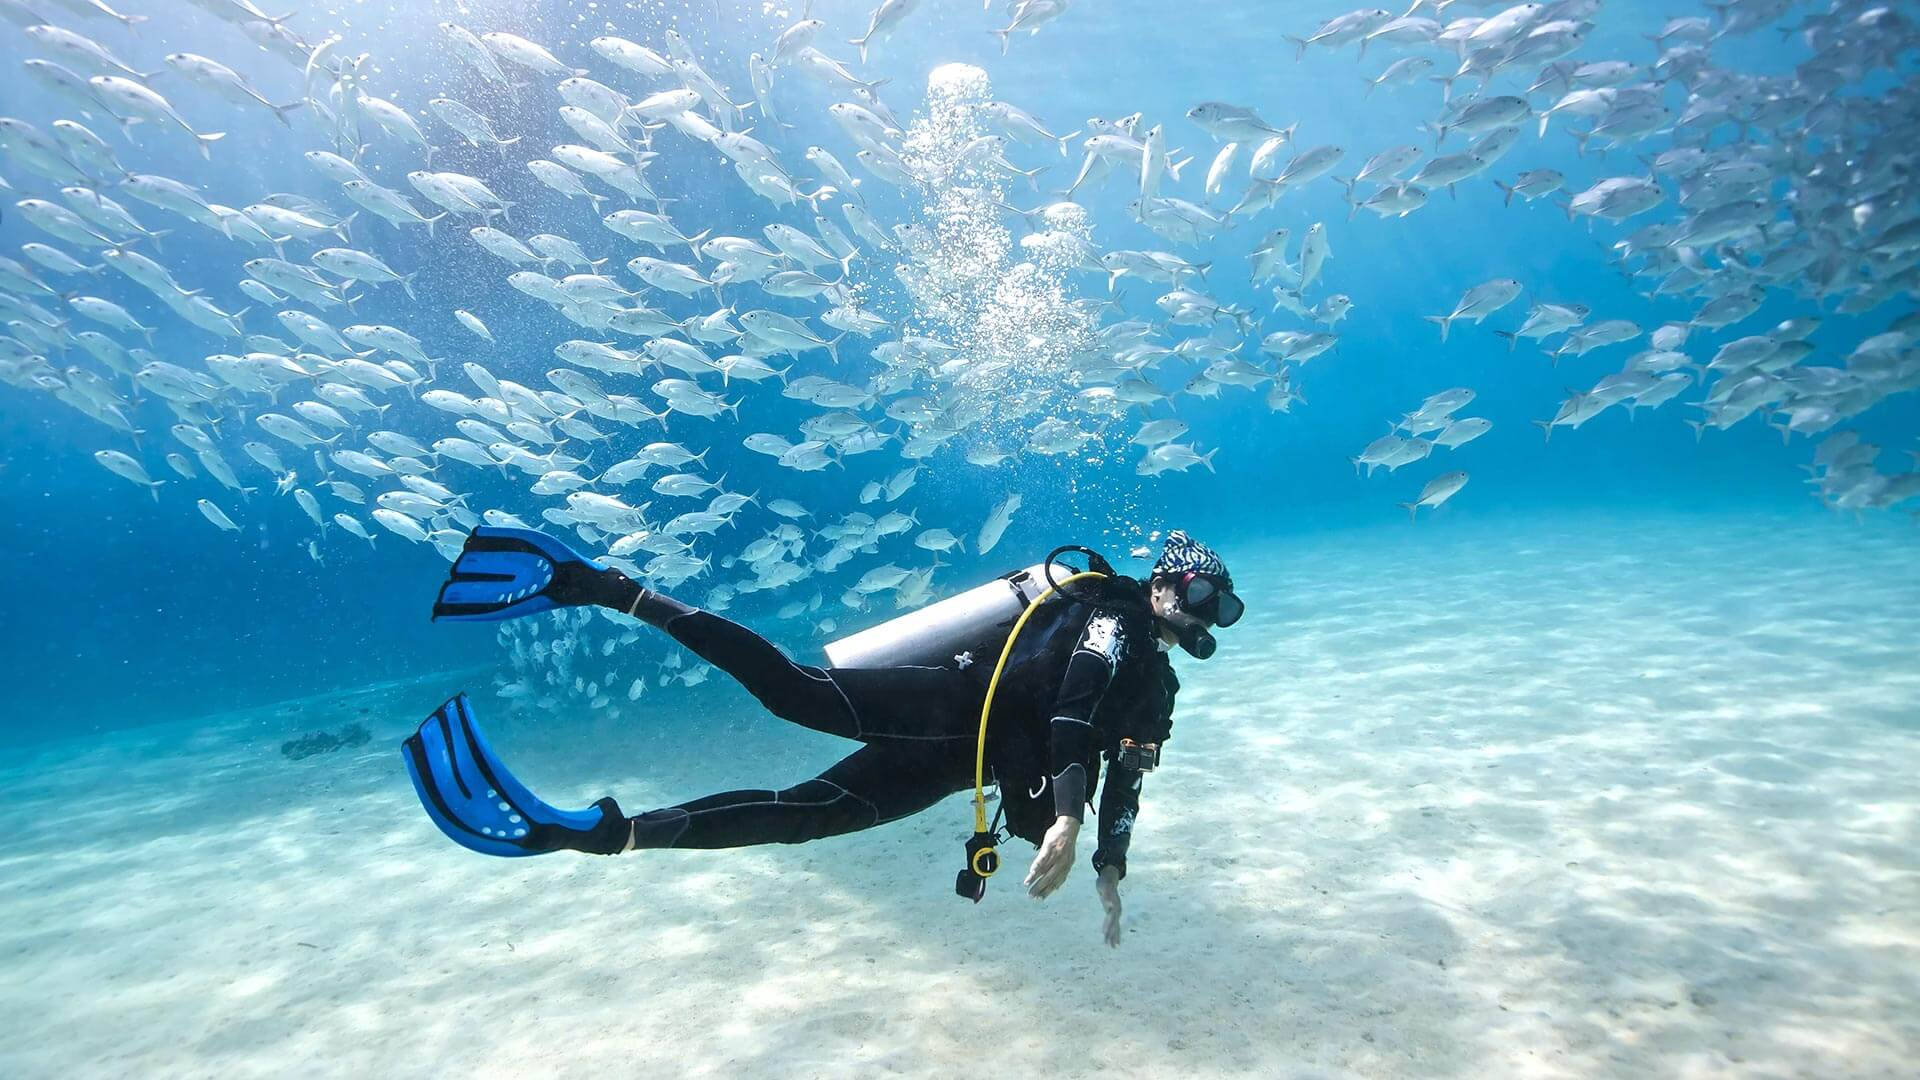 Exhilarating Underwater Exploration: Scuba Diving with Silver Fishes Wallpaper